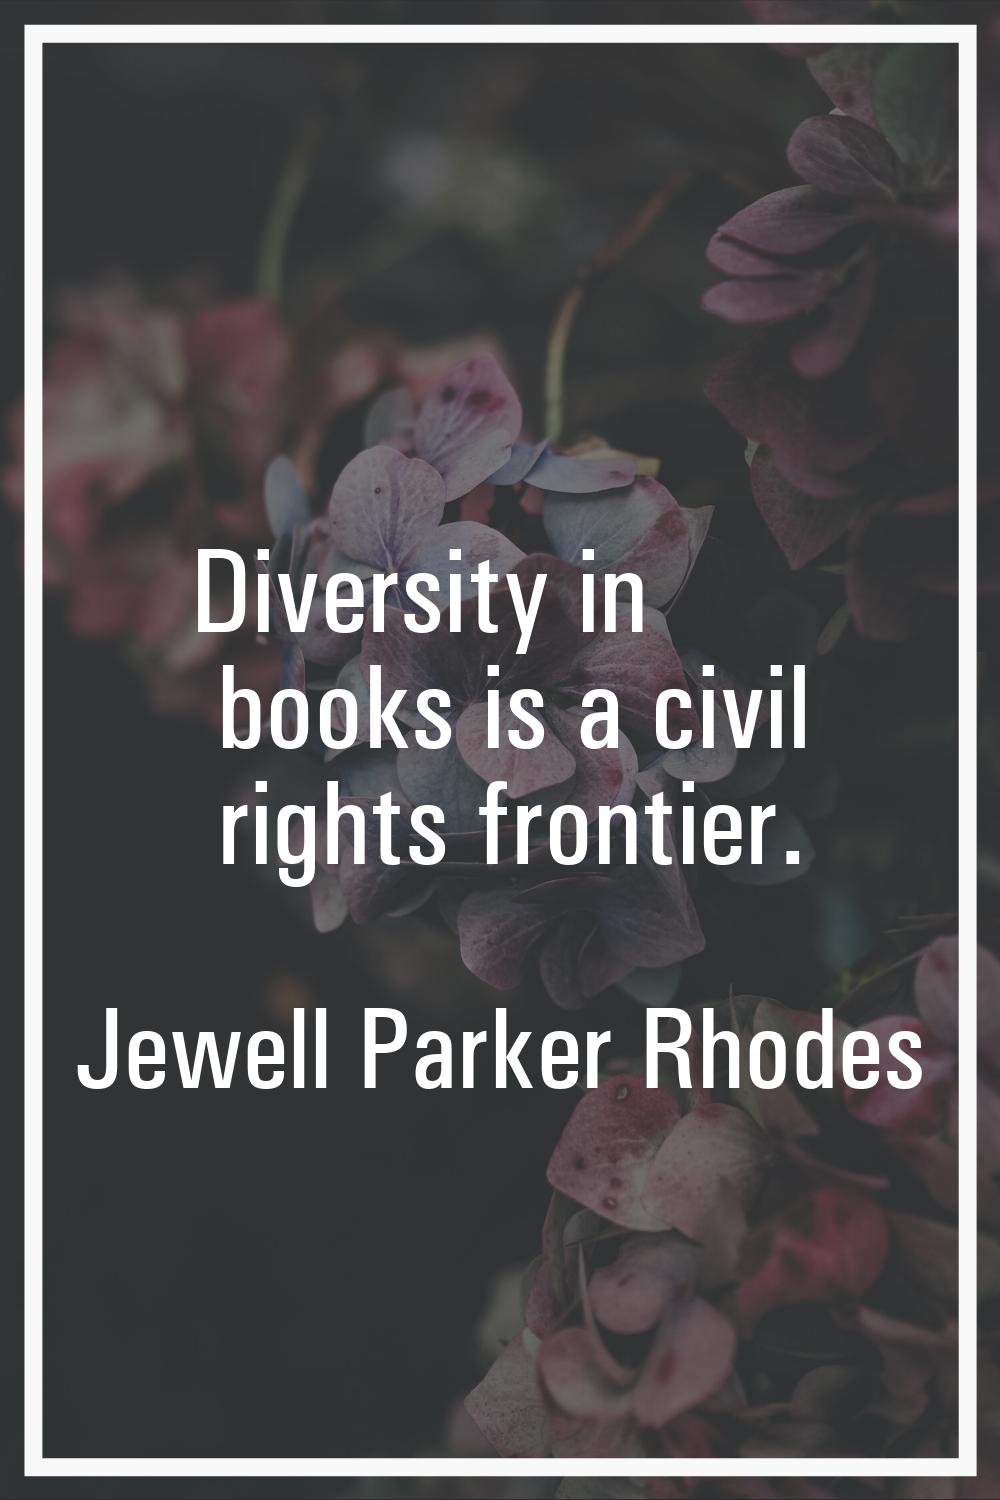 Diversity in books is a civil rights frontier.